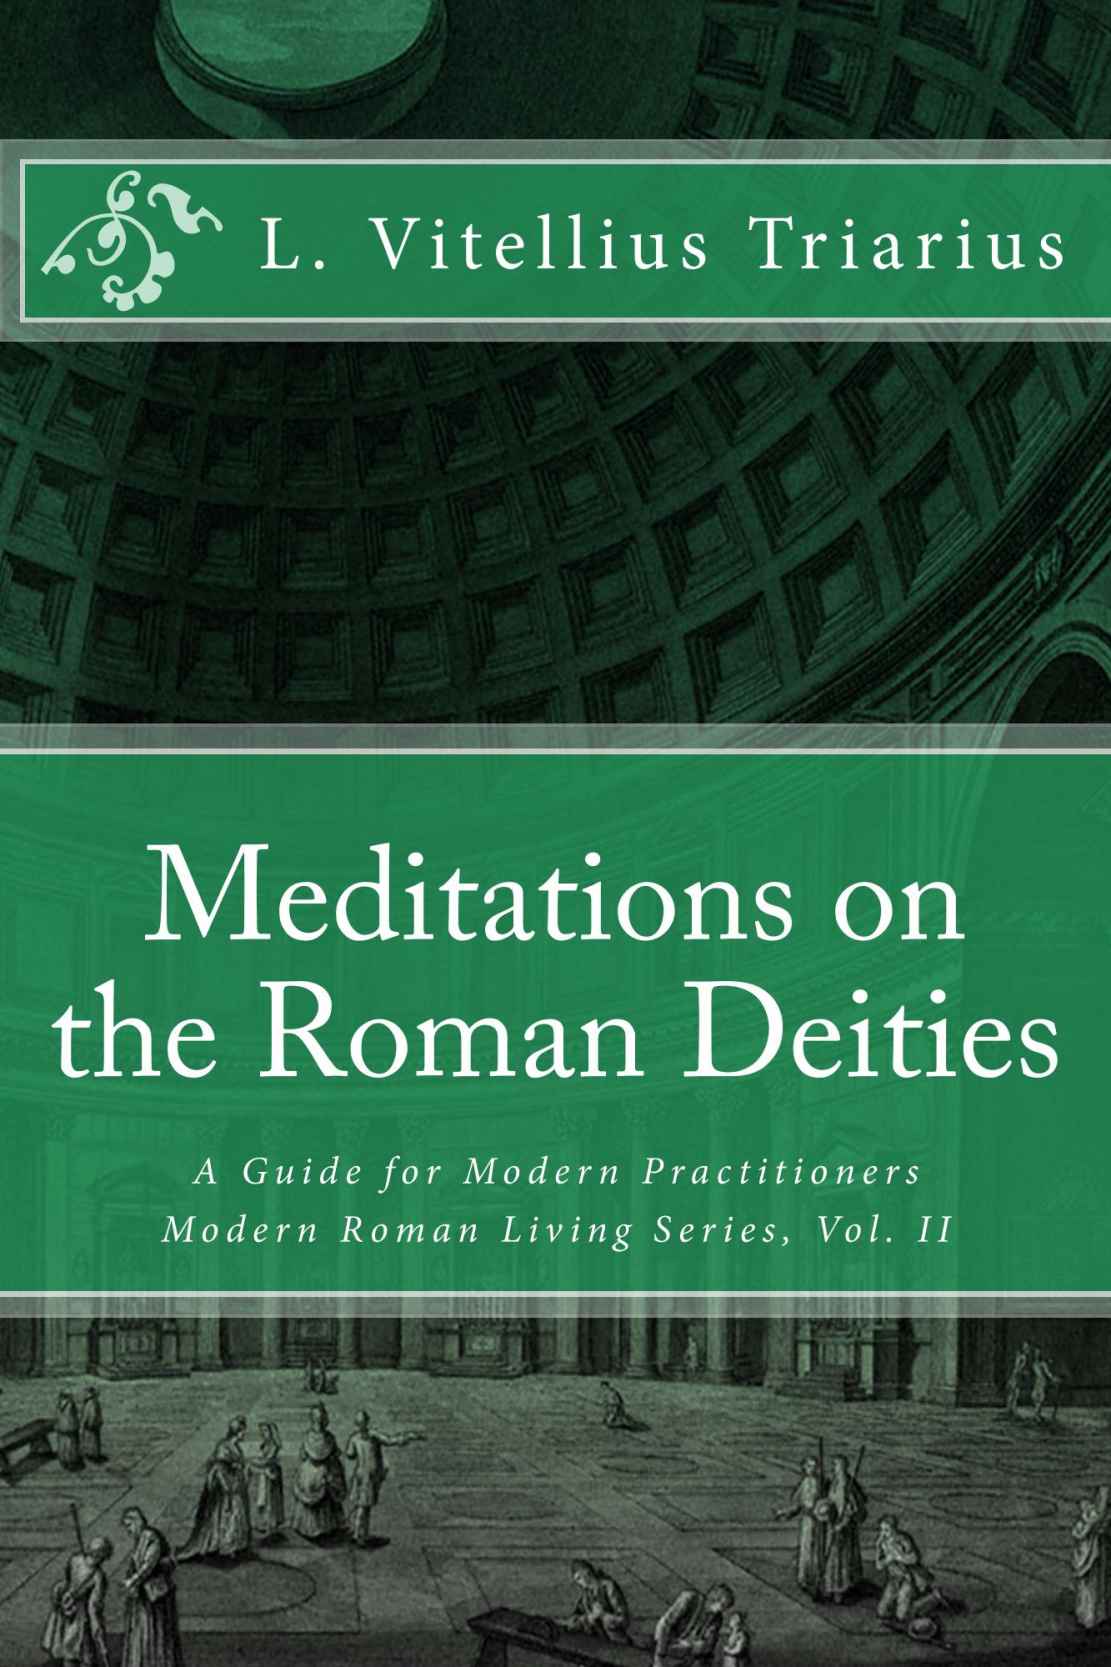 Meditations on the Roman Deities: A Guide for Modern Practitioners